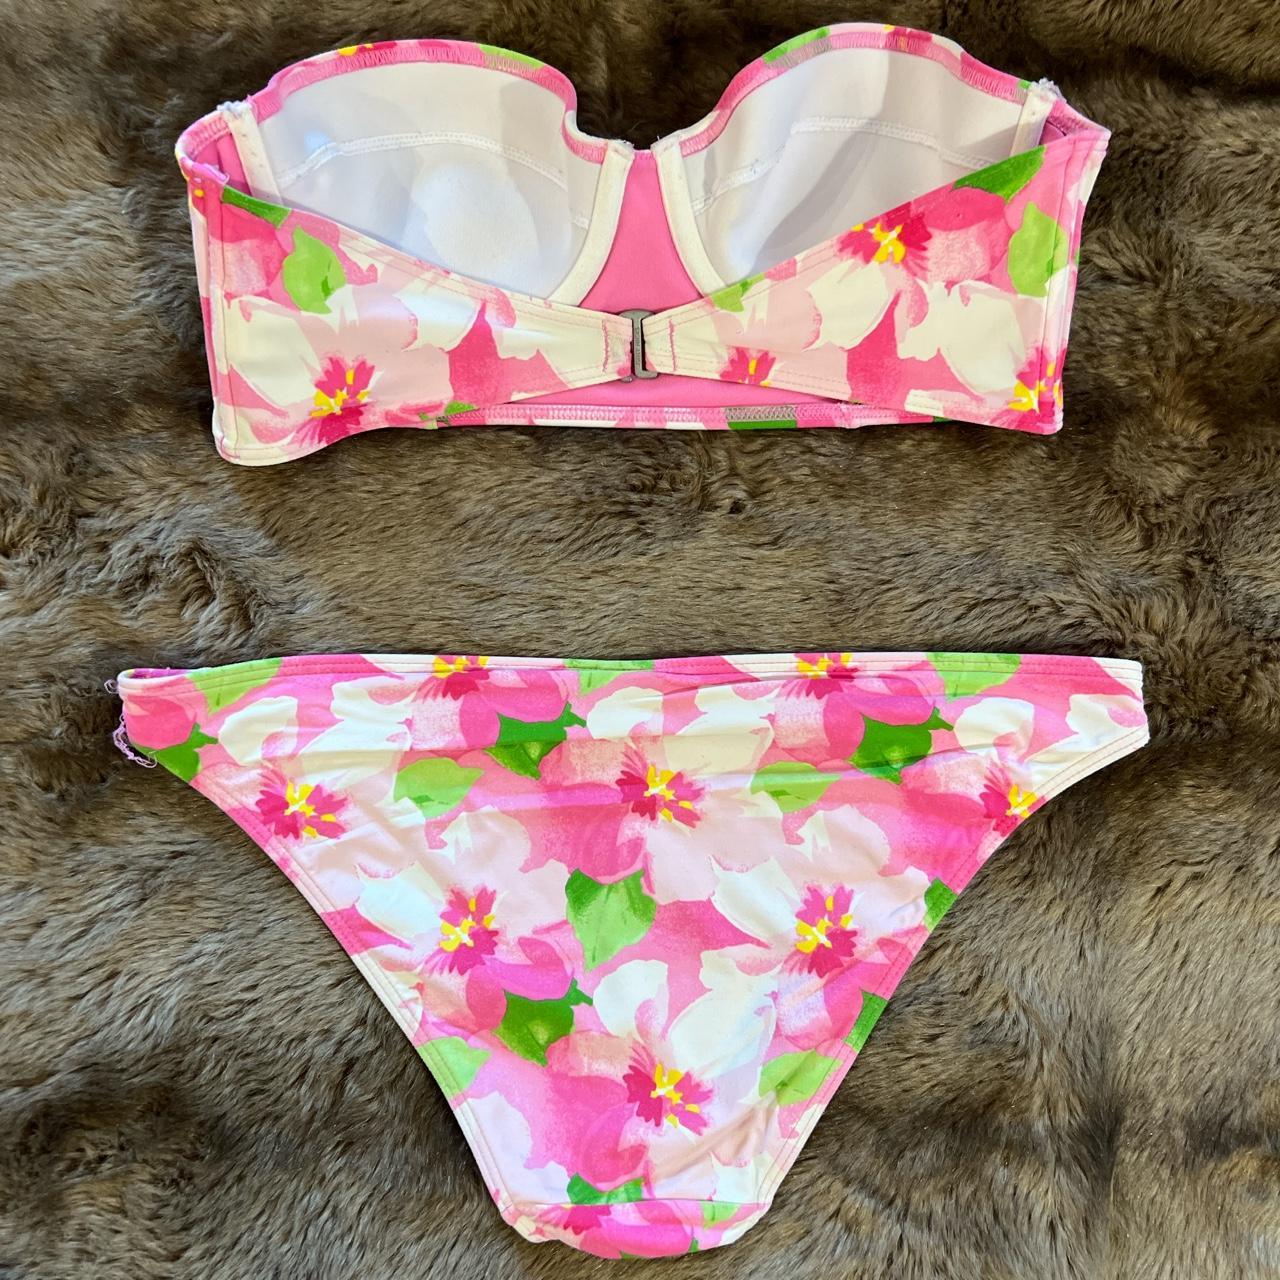 Gilly Hicks Women's Pink and Green Bikinis-and-tankini-sets | Depop